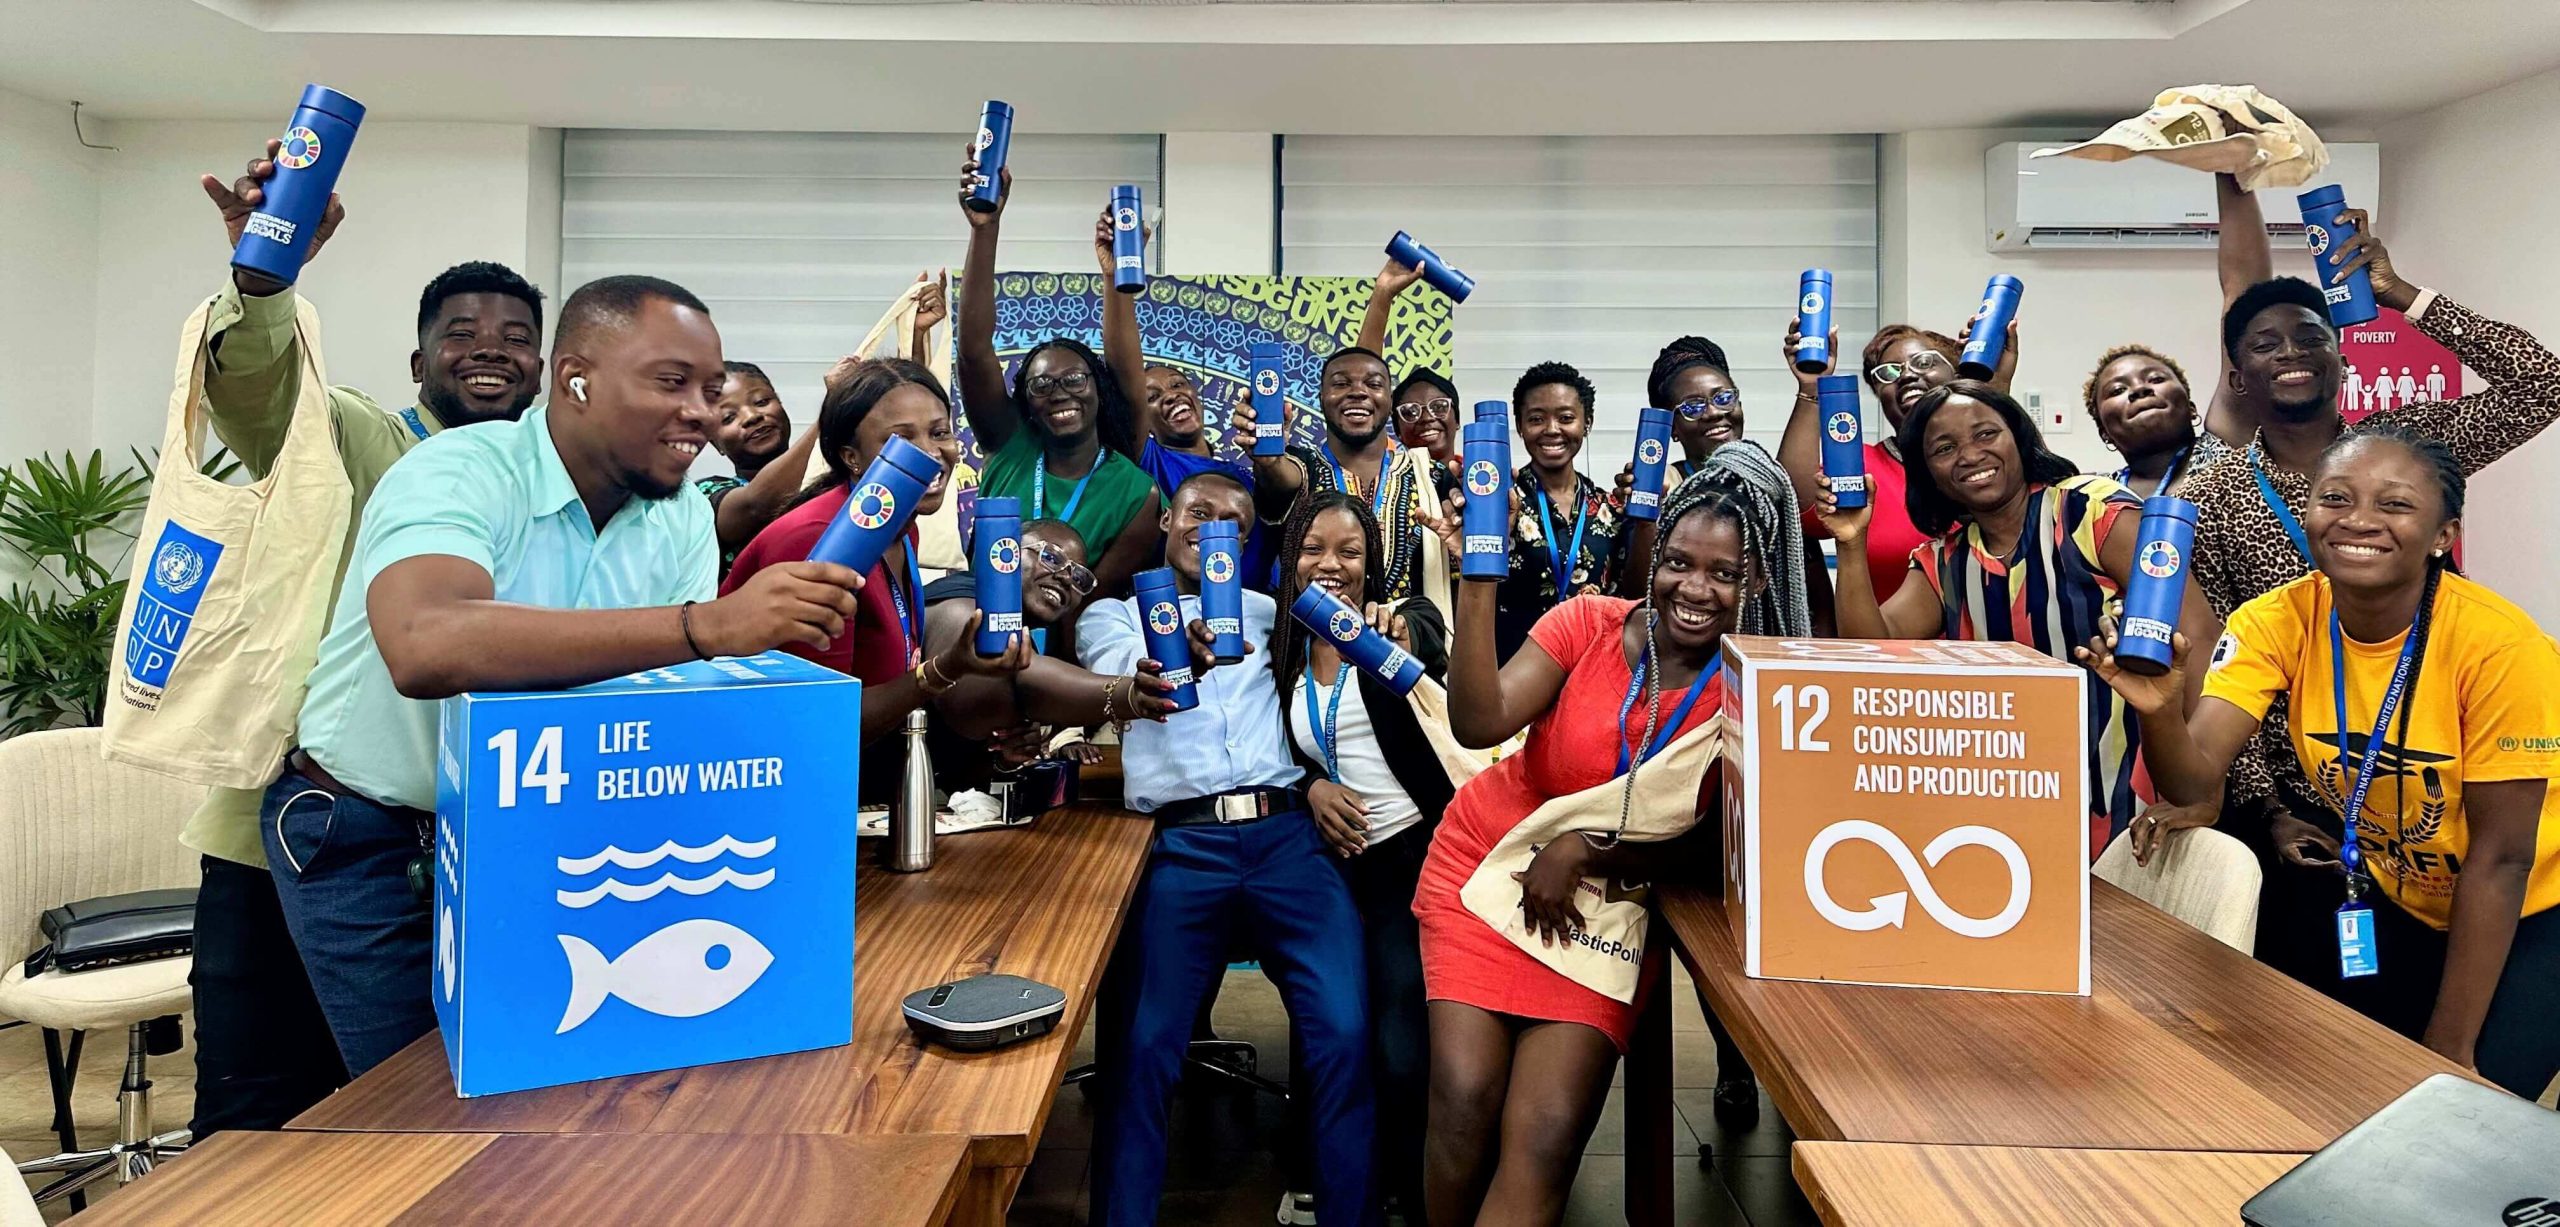 Uniting voices and pledges to beat plastic pollution in Ghana